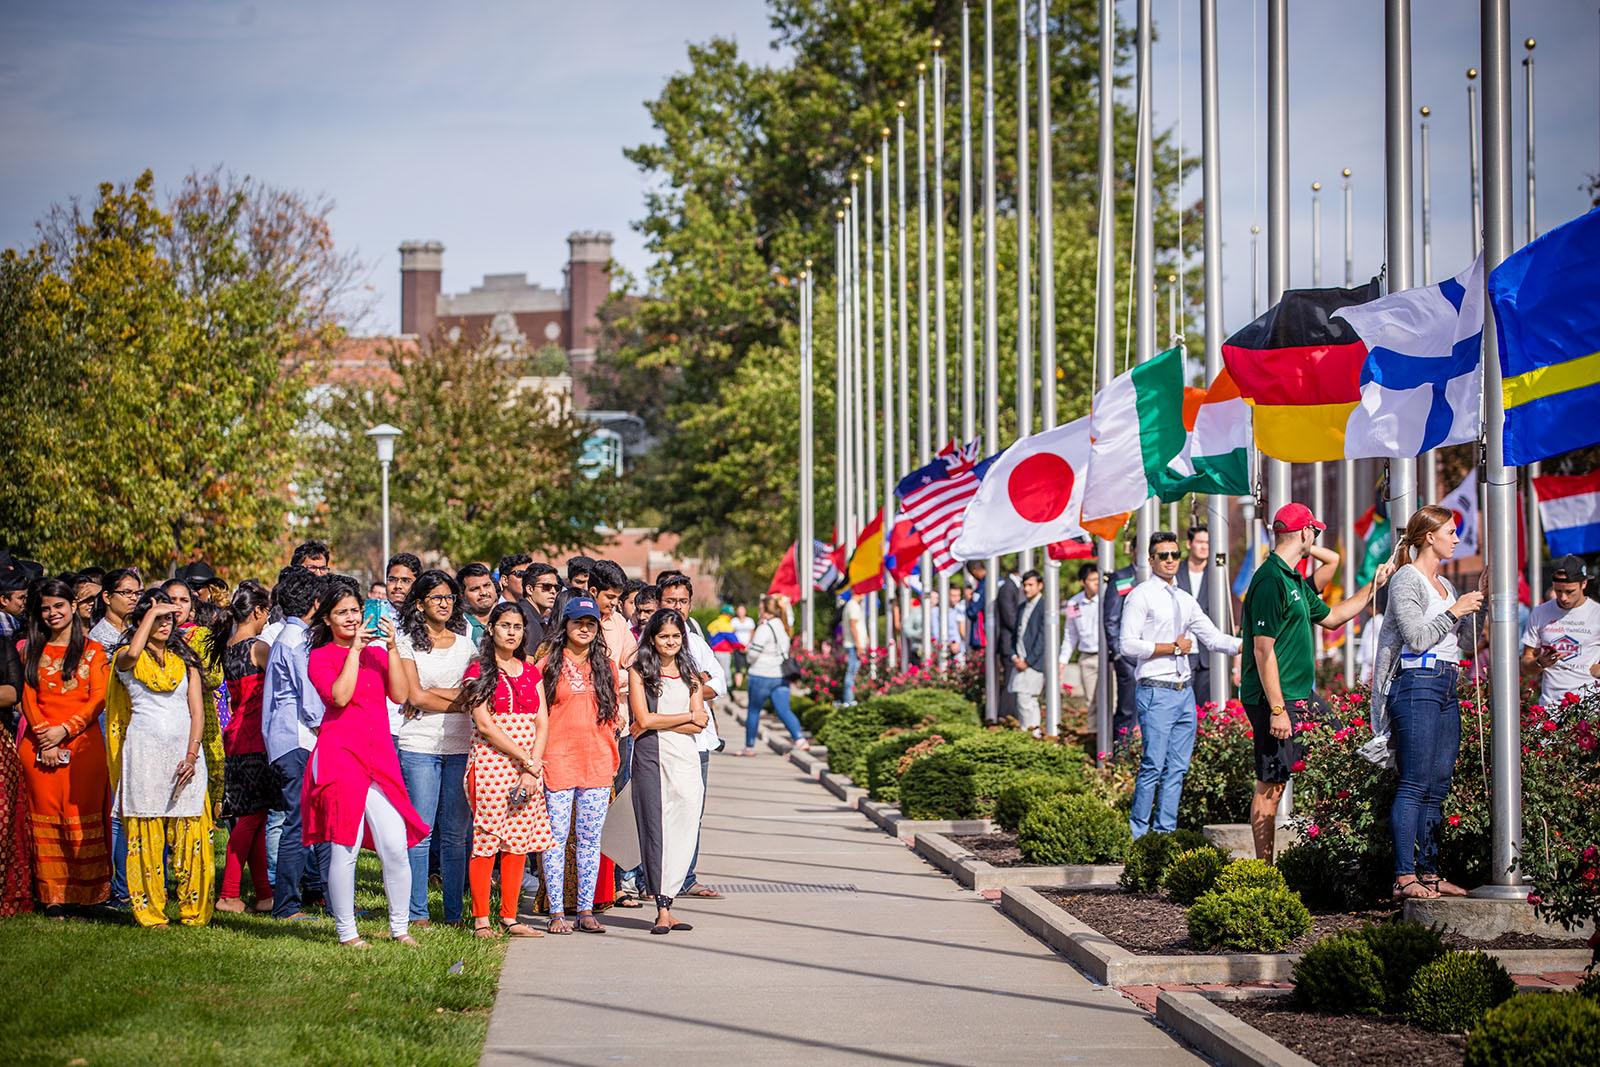 During Northwest’s annual flag-raising ceremony each fall, the University’s international community gathers and students raise their country's flags in accordance with United Nations protocol.